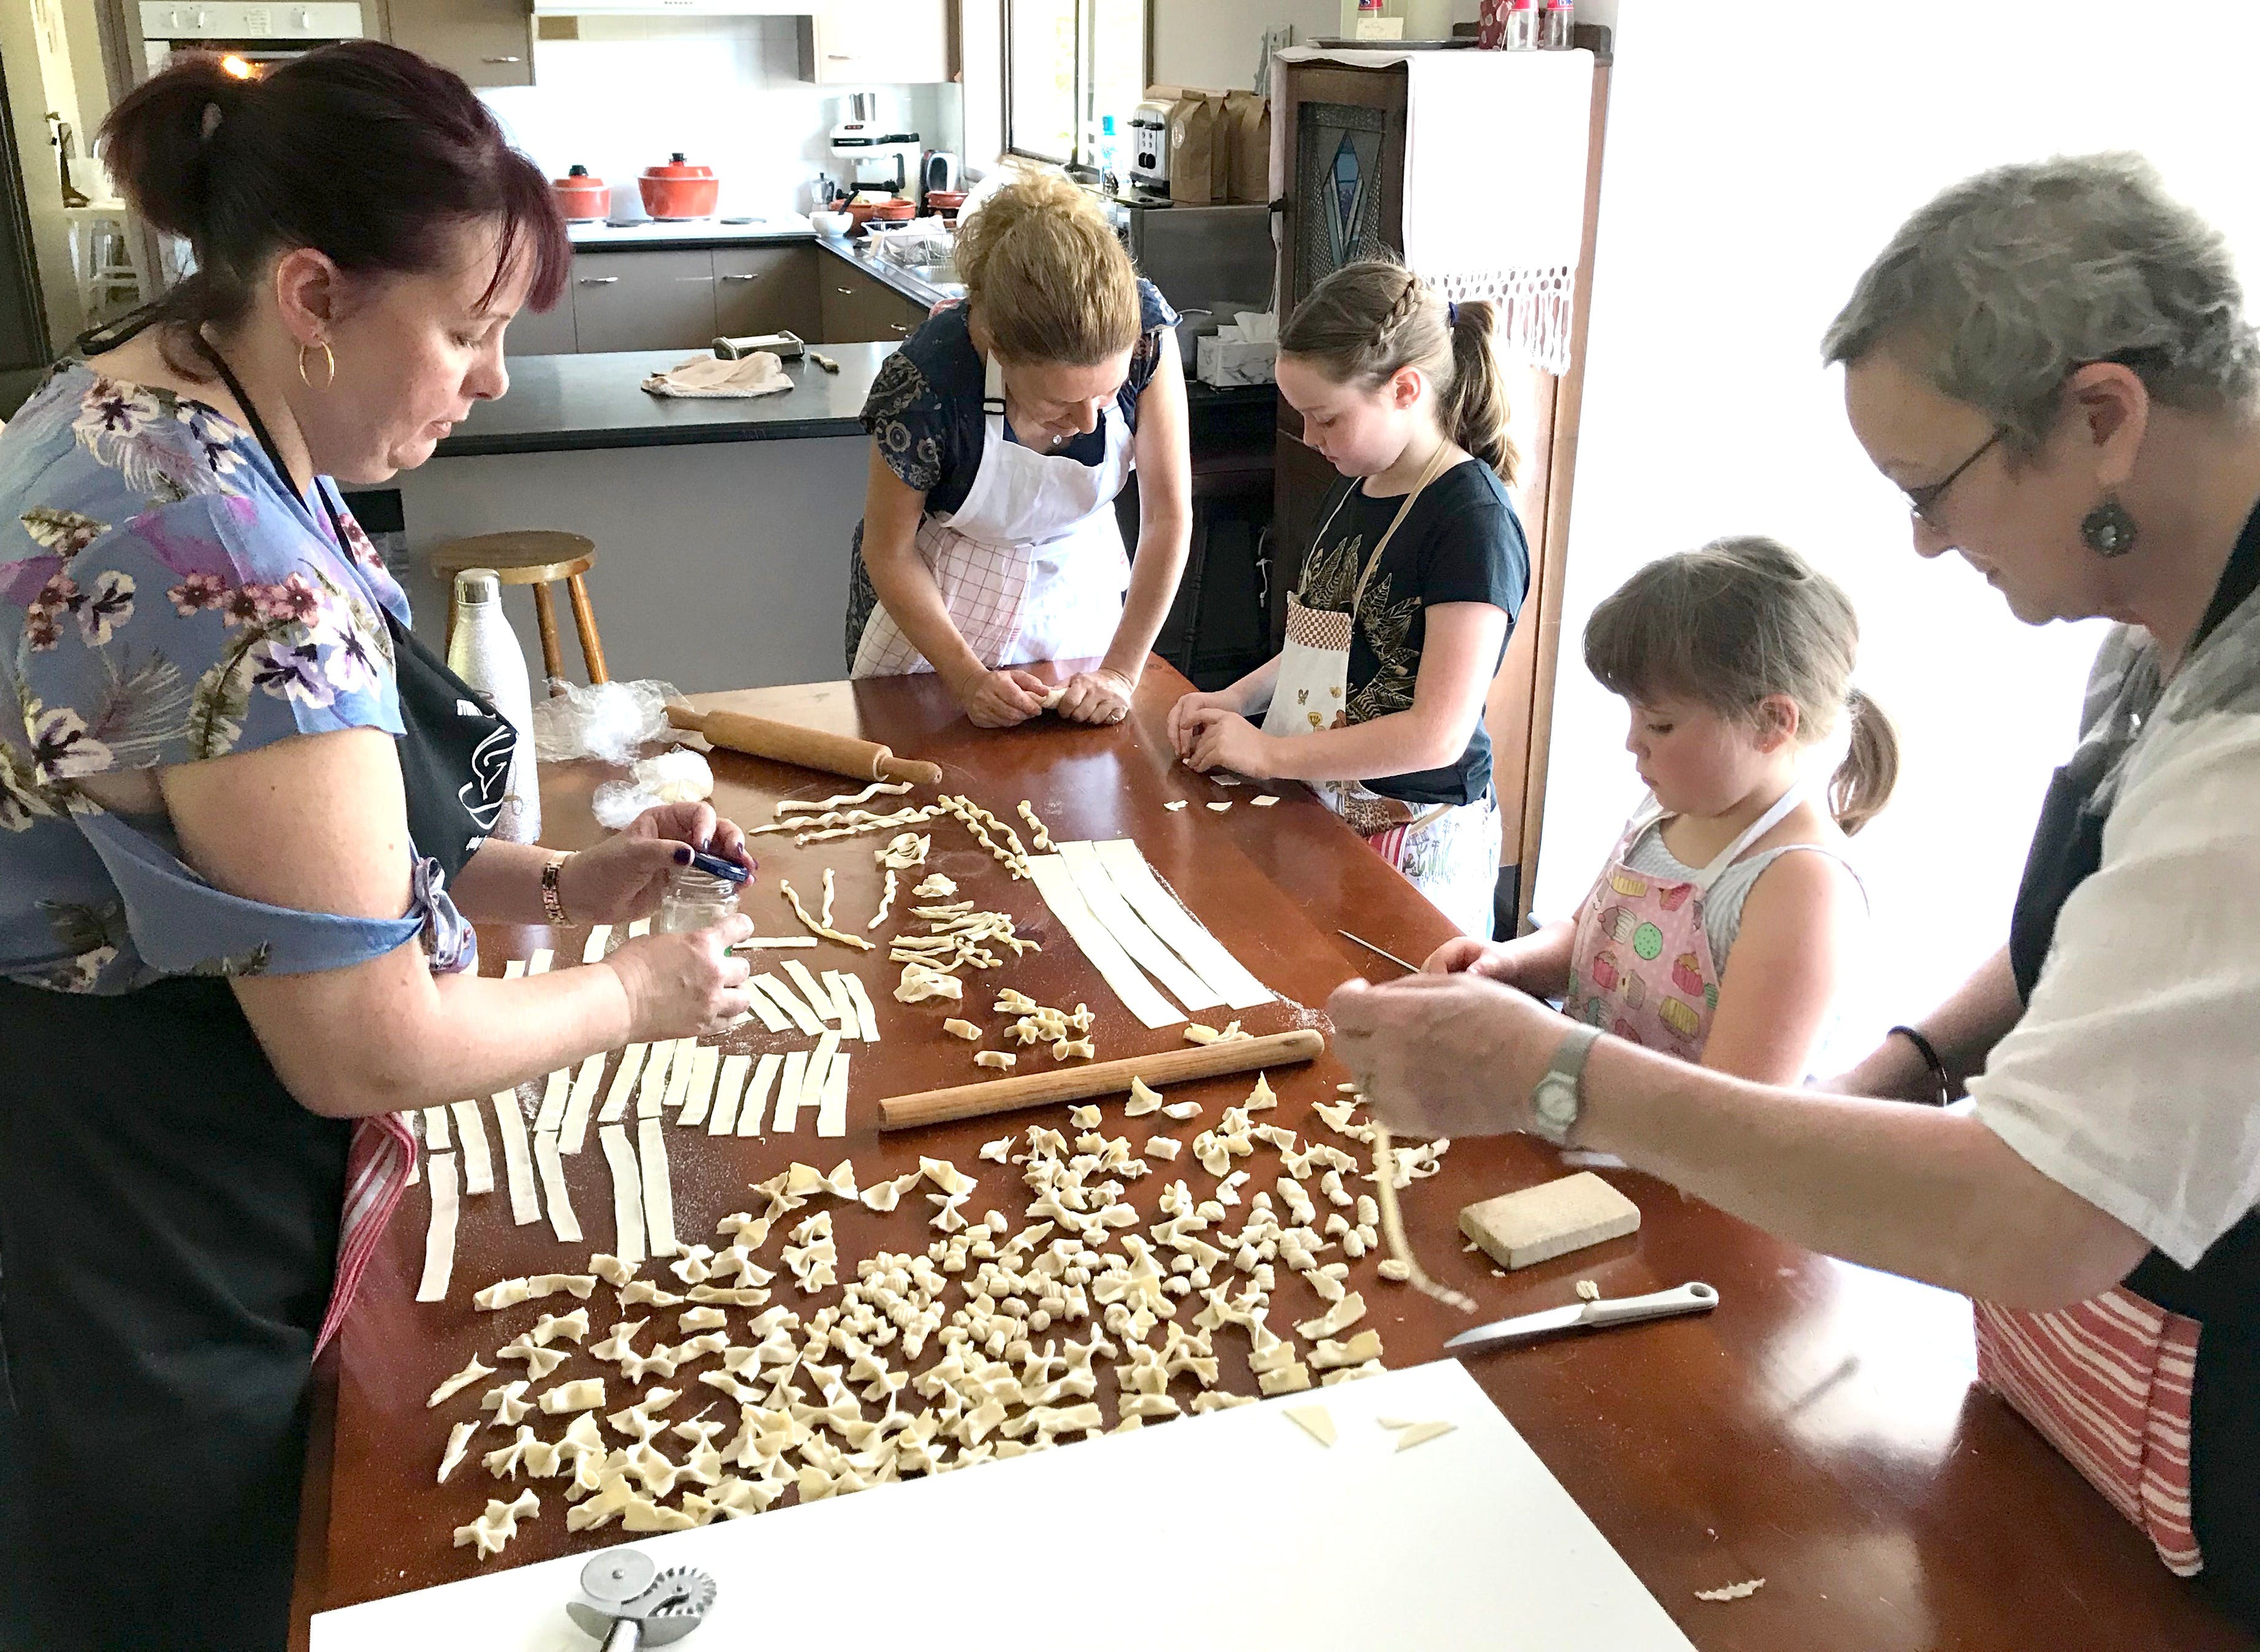 Kids Pasta Making Class - hands on fun at your house - Accommodation Kalgoorlie